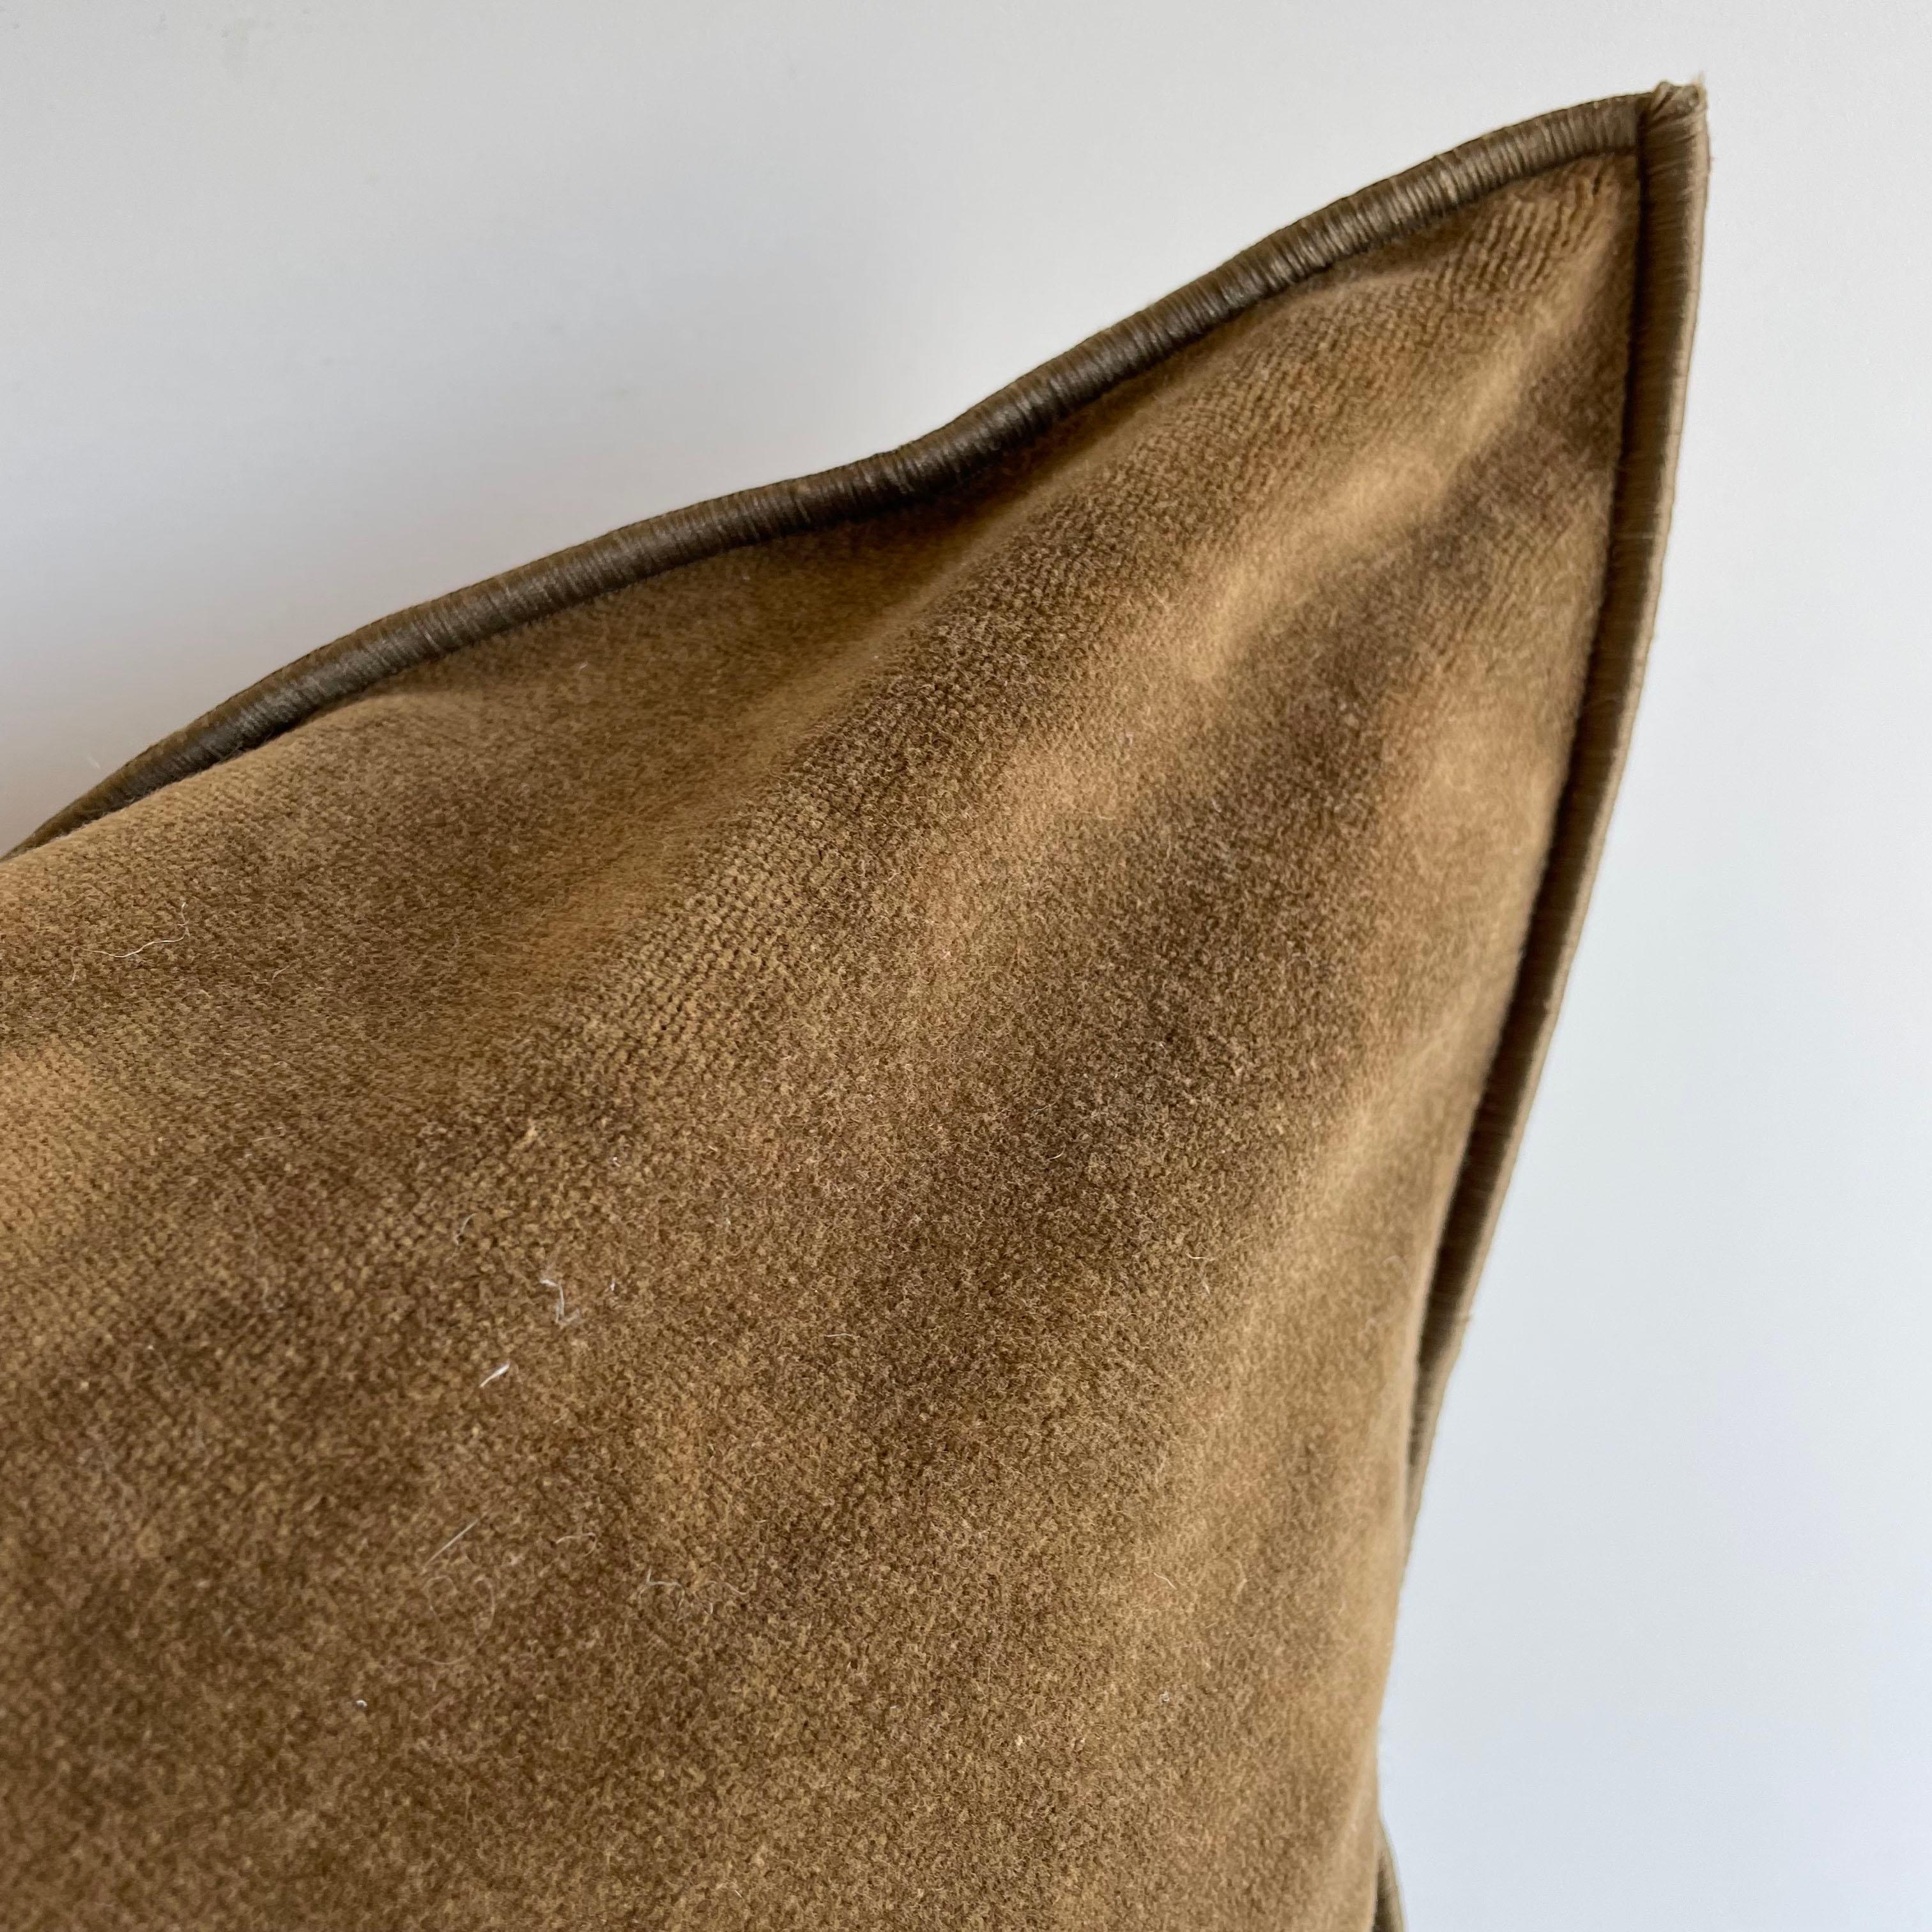 Beautiful French brown vintage velvet pillow with binded edge. Metal zipper closure, and leather pull. Custom made in Paris, France. Includes insert. 

Size: 20